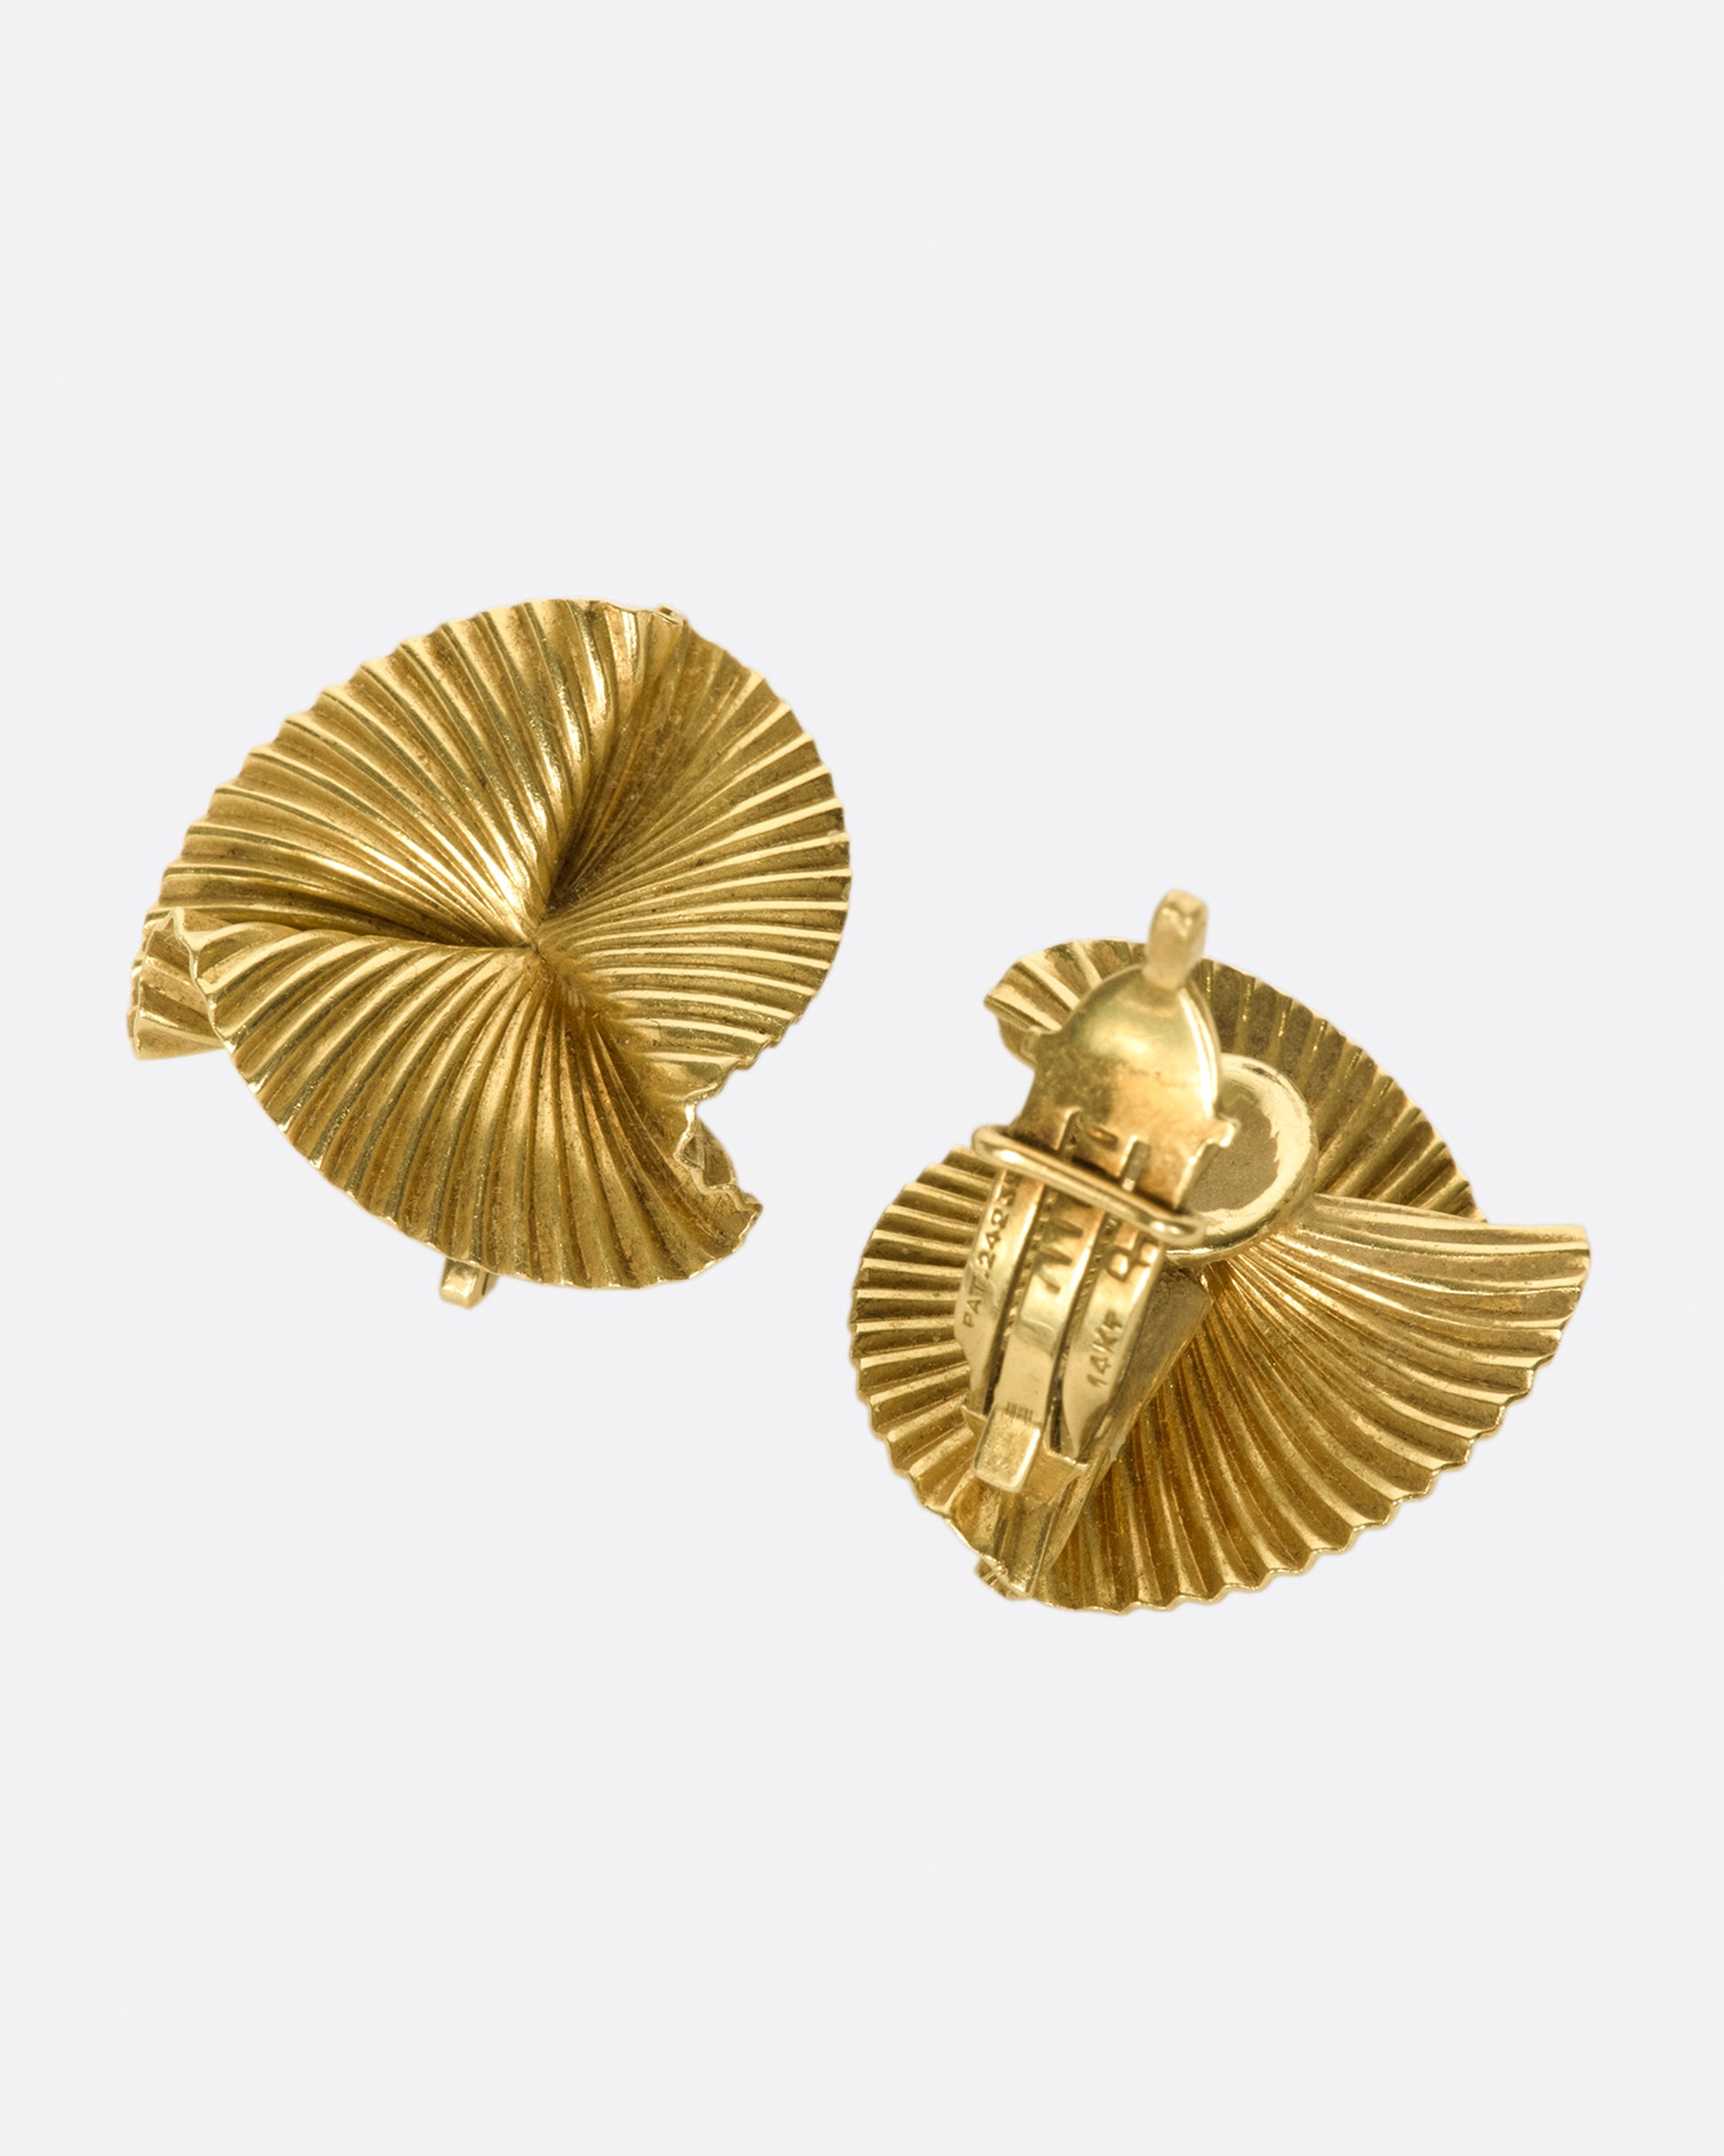 Vintage clip-on 14k gold round fan earrings. These are especially beautiful as the ribbed lines grab light, fanning it across your lobes.